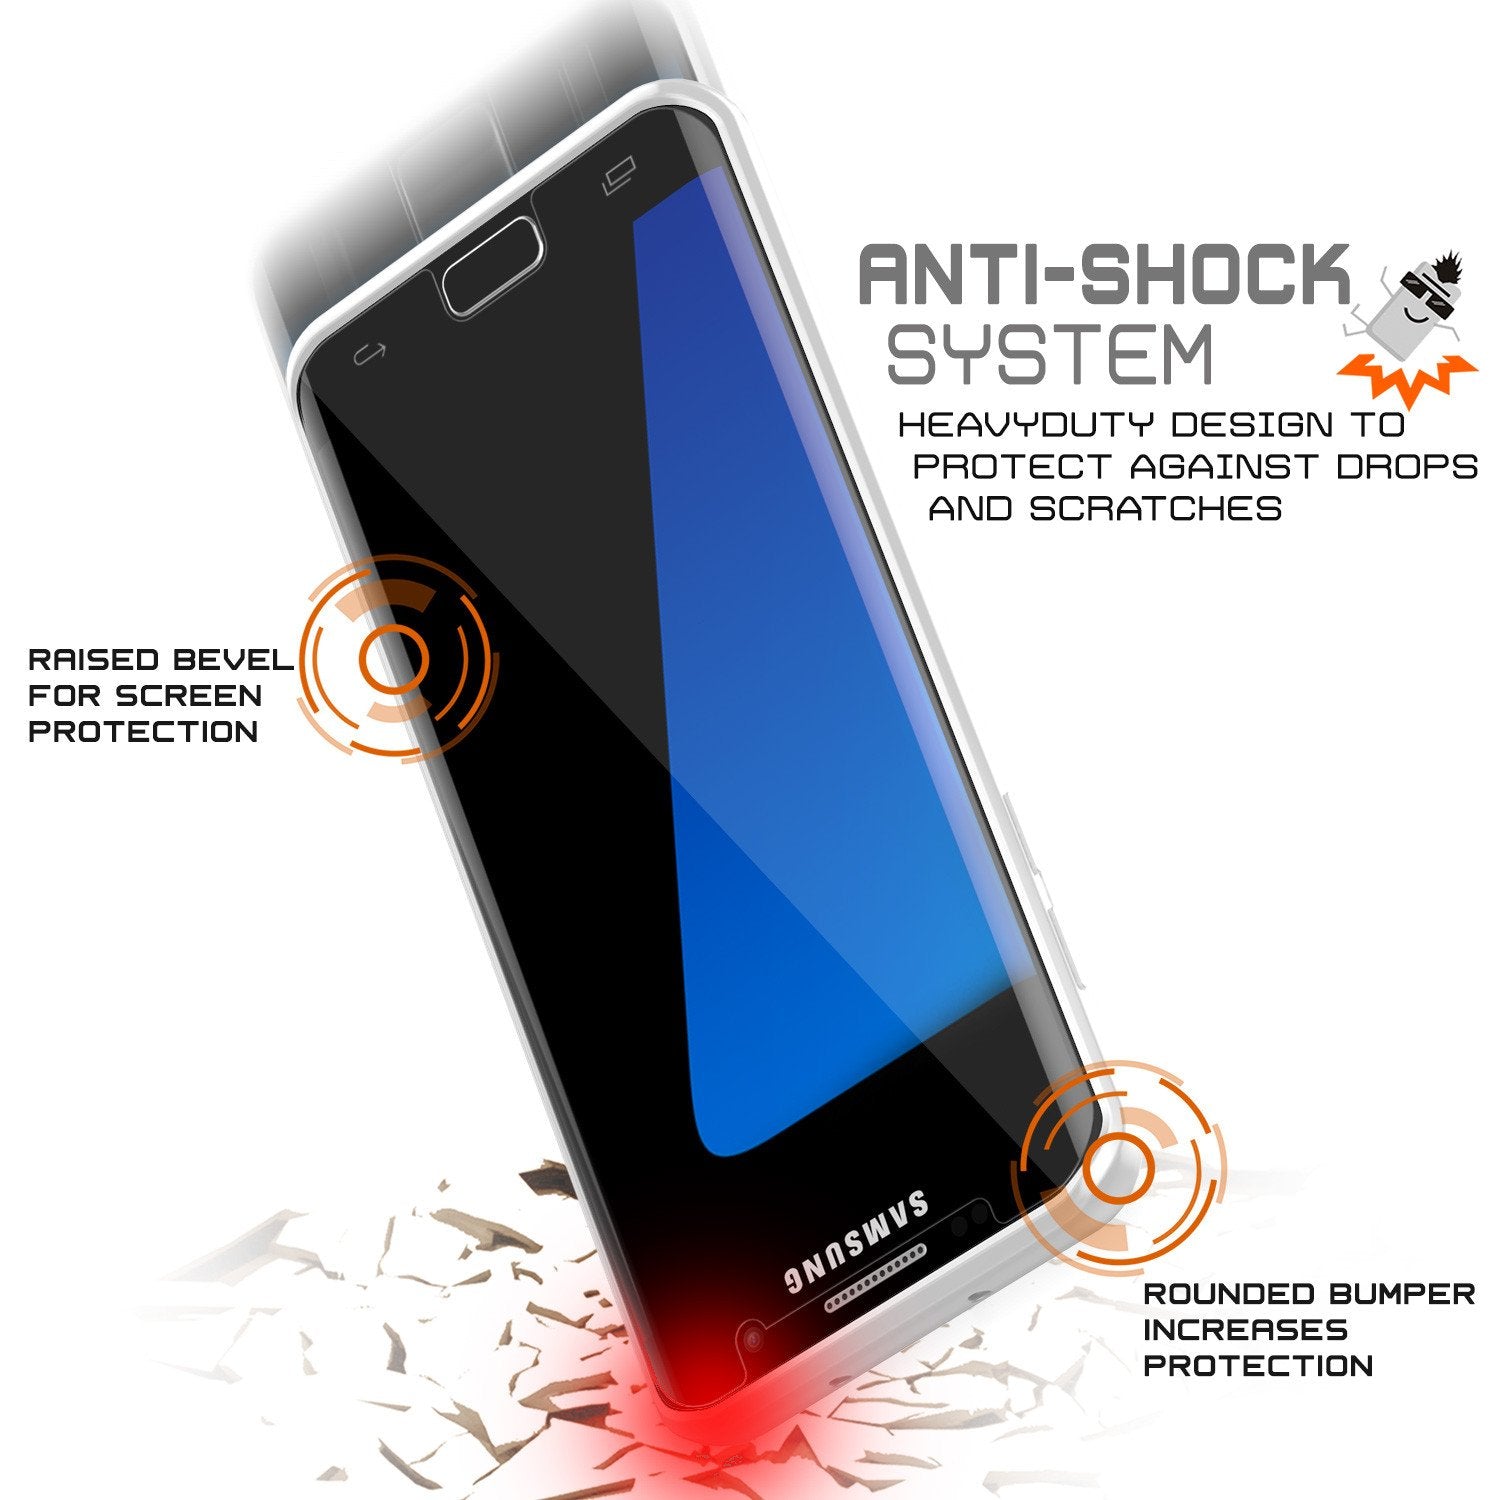 S7 Edge Case Punkcase® LUCID 2.0 White Series w/ PUNK SHIELD Screen Protector | Ultra Fit - PunkCase NZ